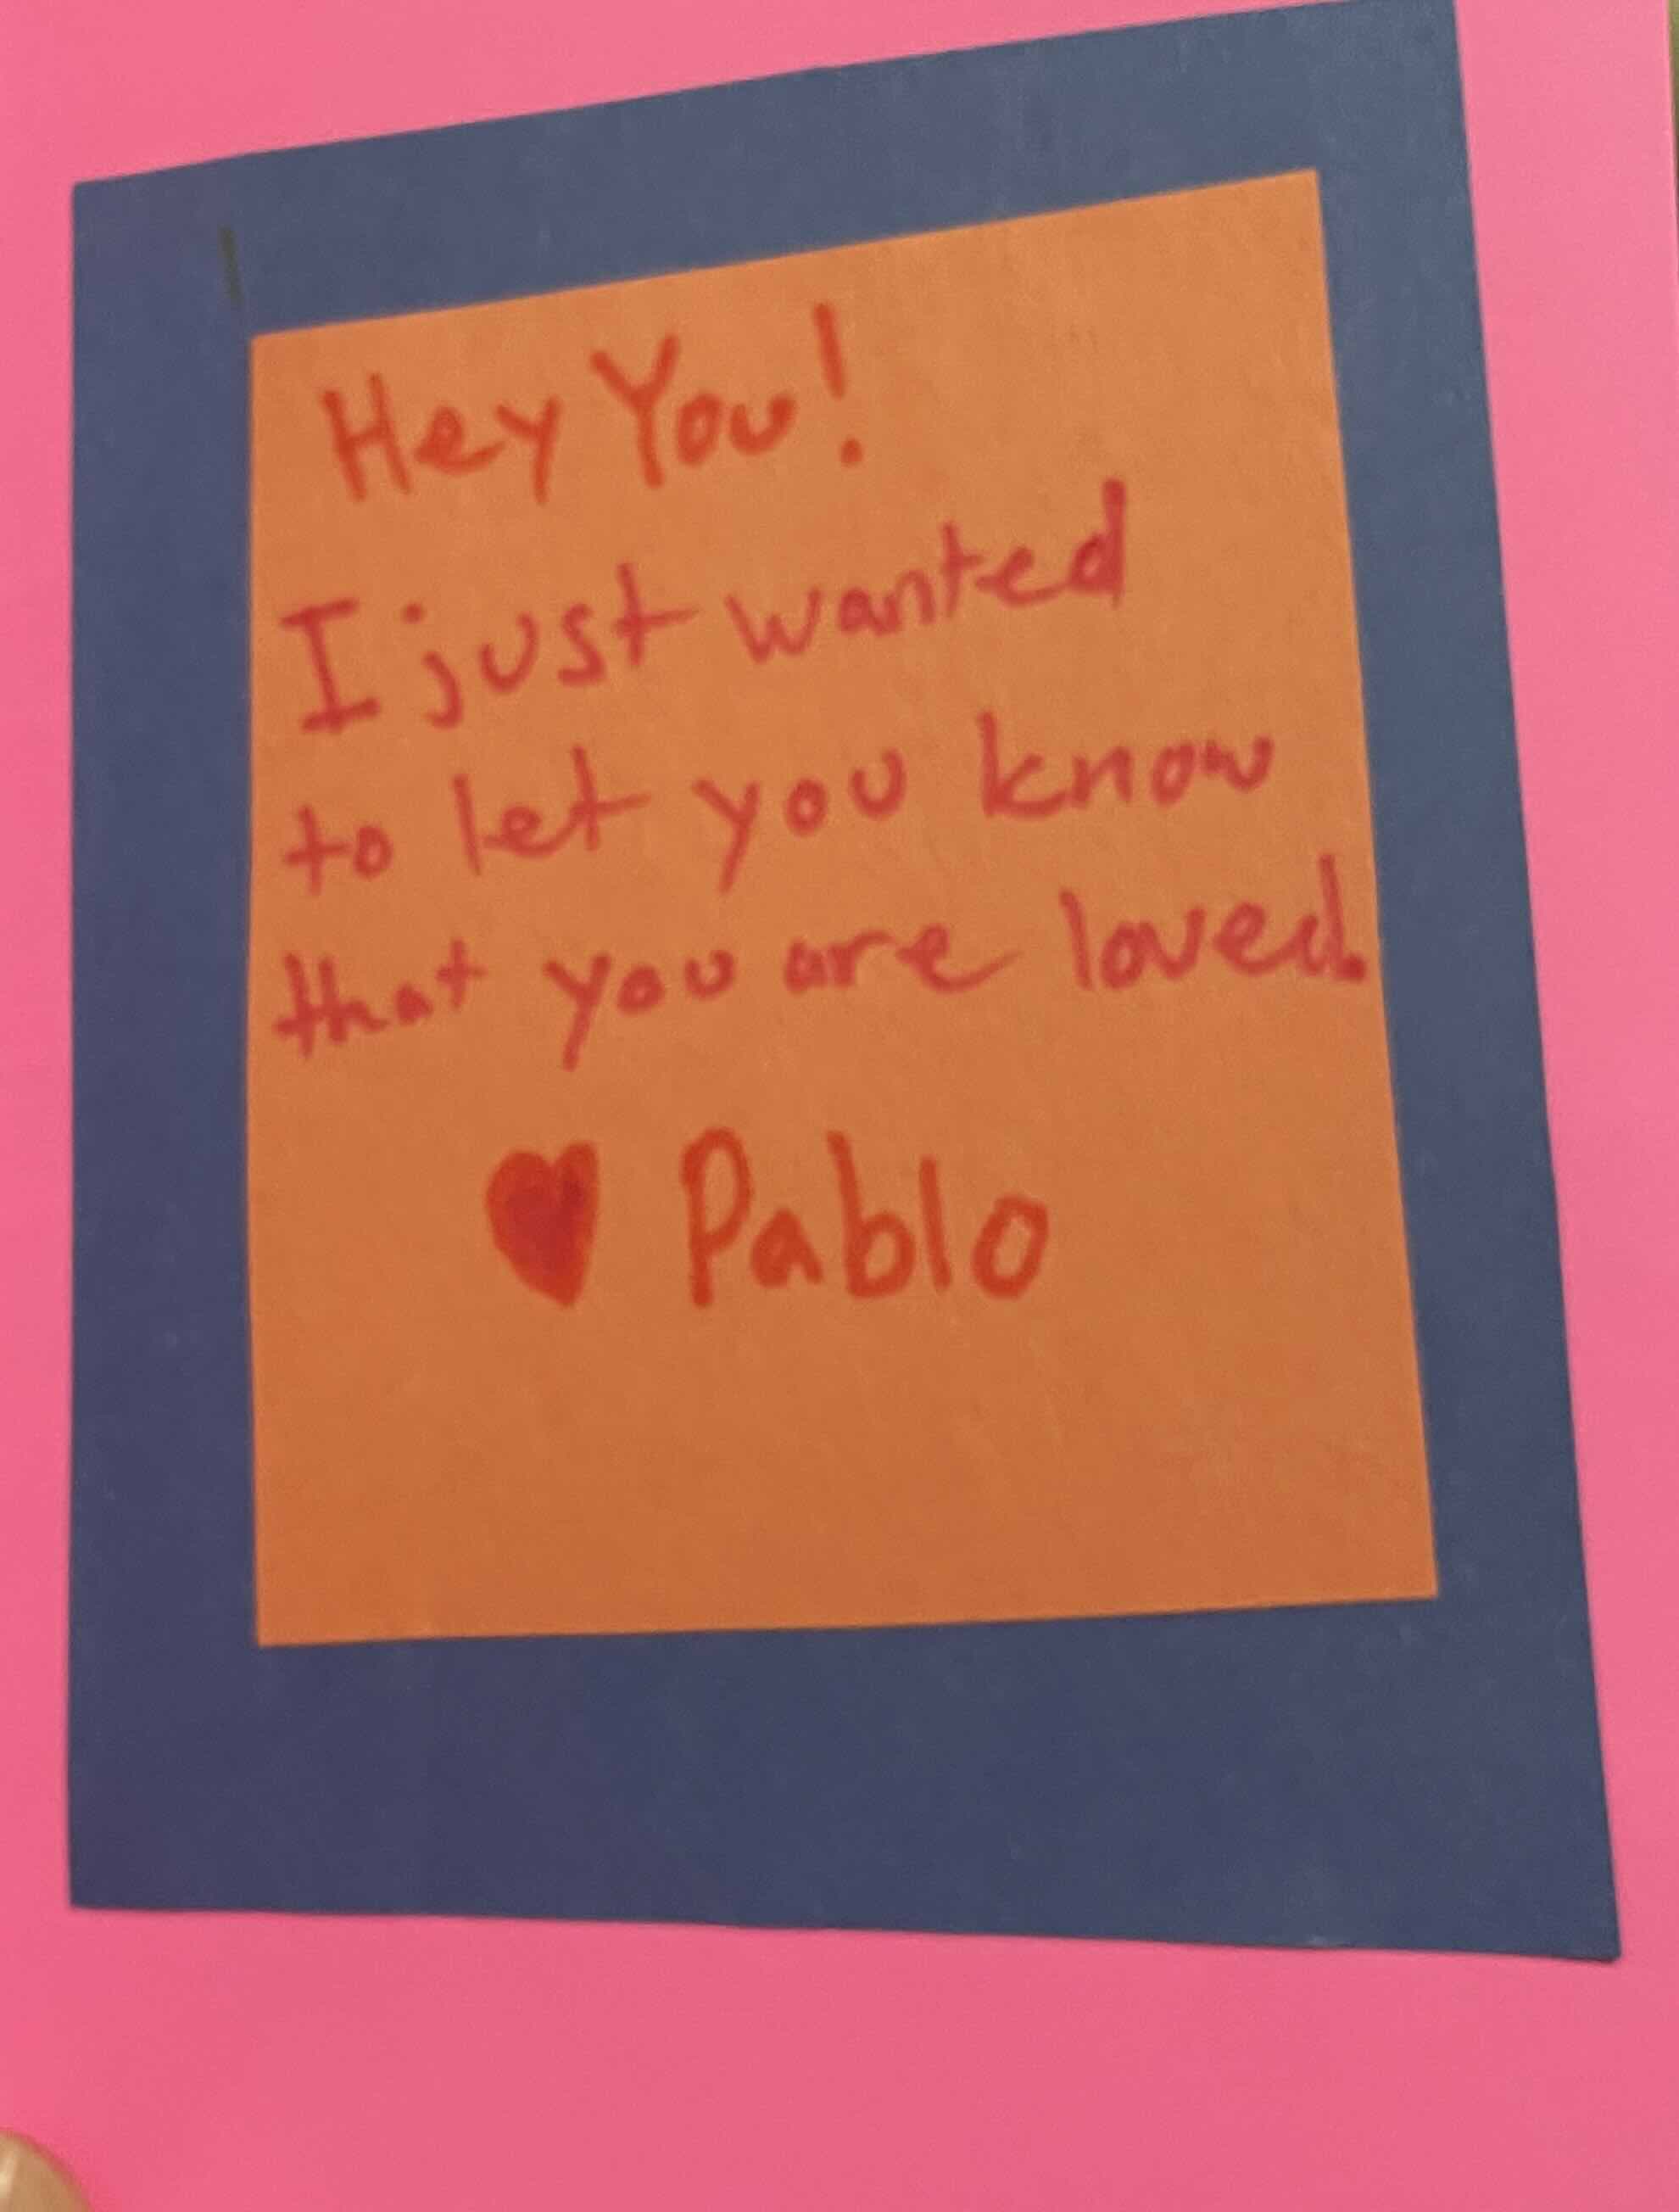 Hey You!
                  I just wanted to let you know that you are loved. ❤️ Pablo